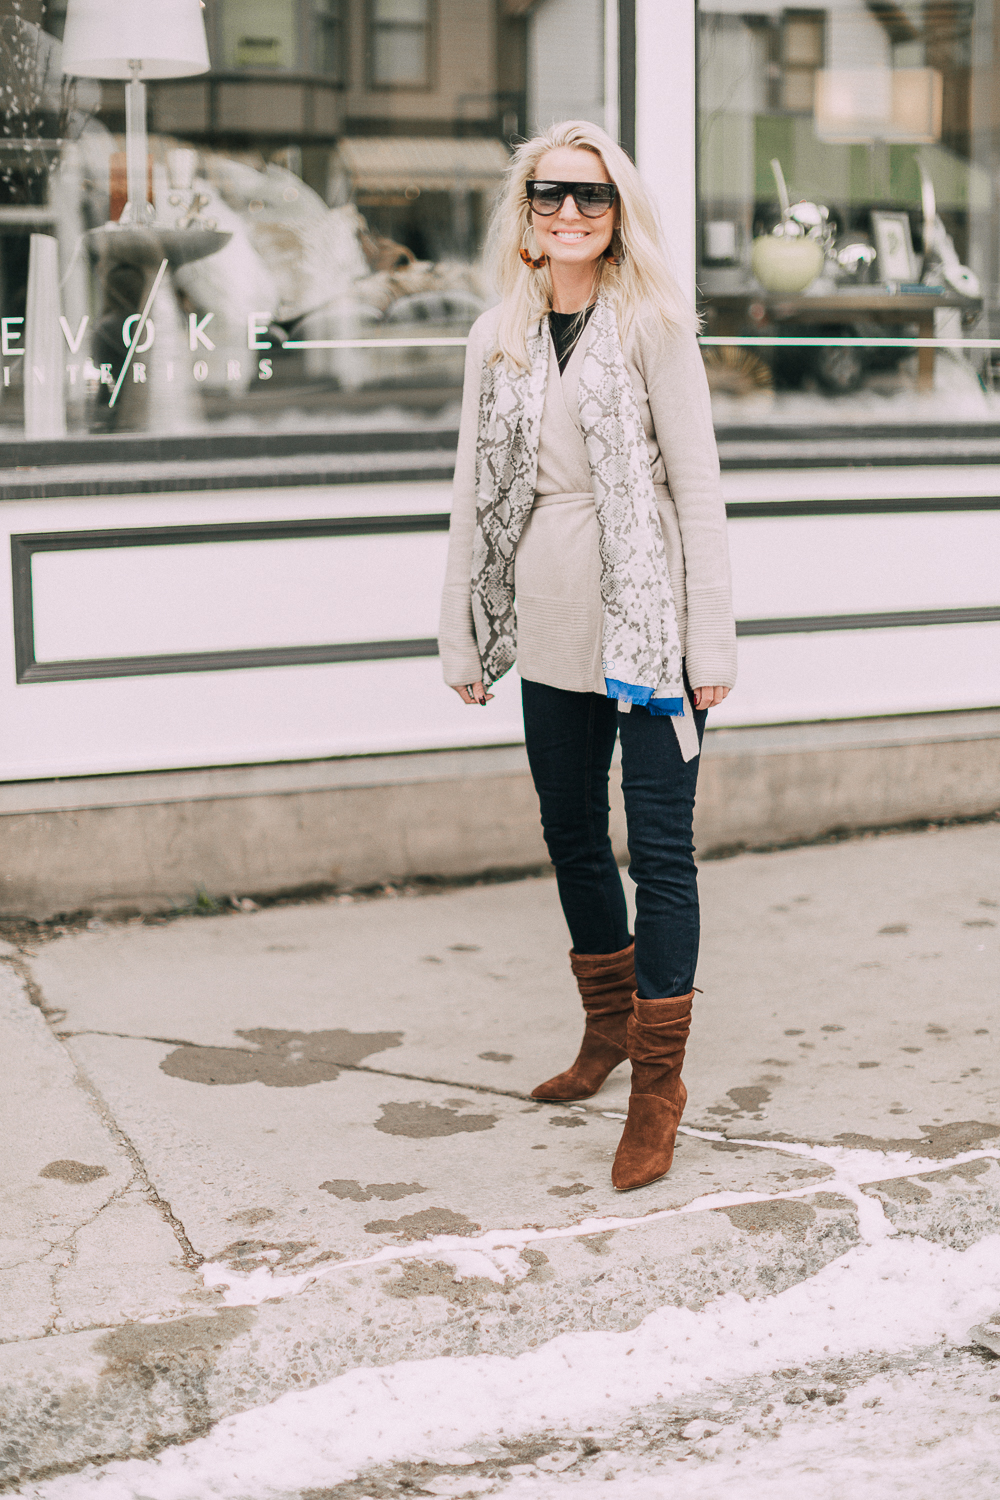 wardrobe staples your closet needs including a black cashmere crewneck sweater and high rise dark wash skinny jeans both from Walmart paired with a cashmere cardigan and python scarf by Calvin Klein